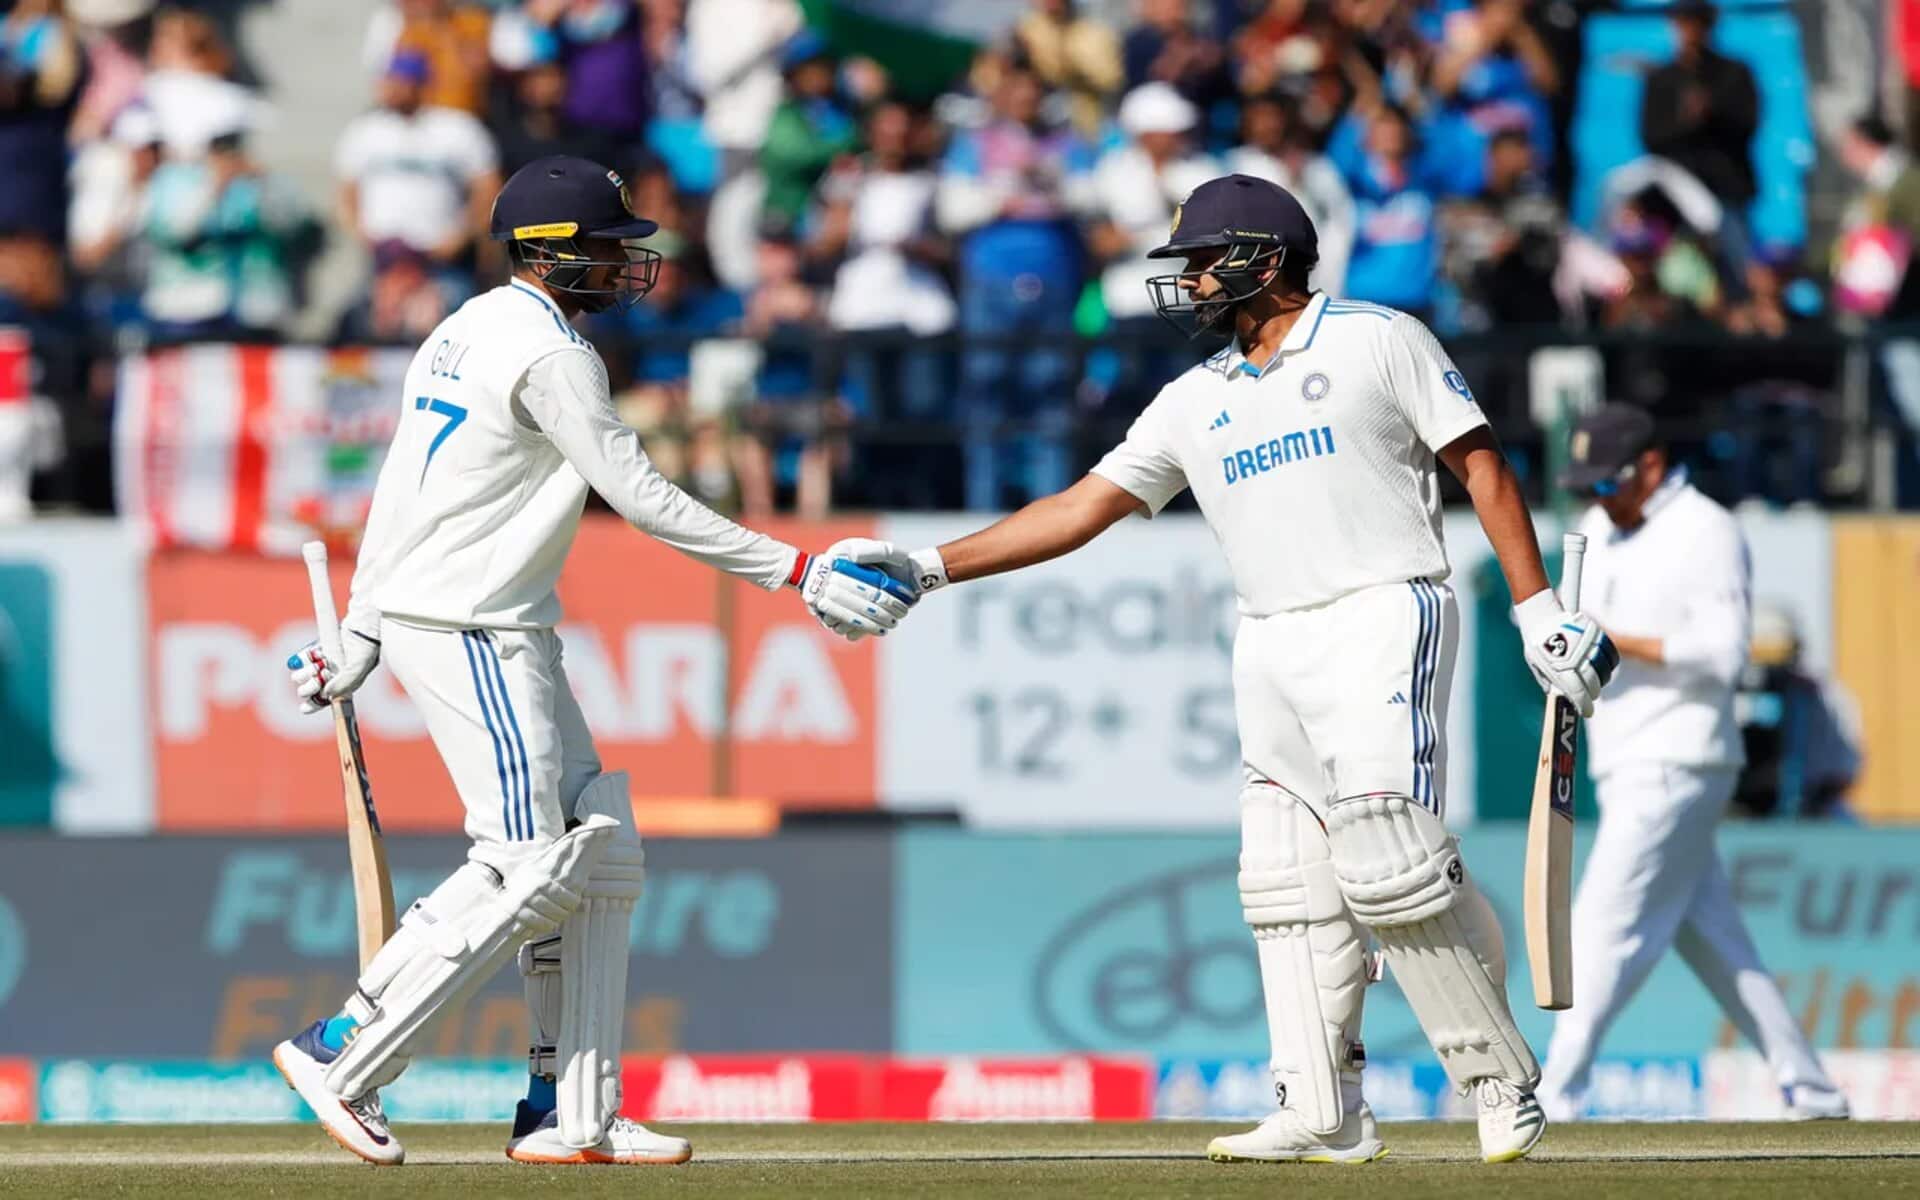 IND vs ENG, 5th Test, Day 2 Live Score: Match Updates, Highlights & Live Streaming